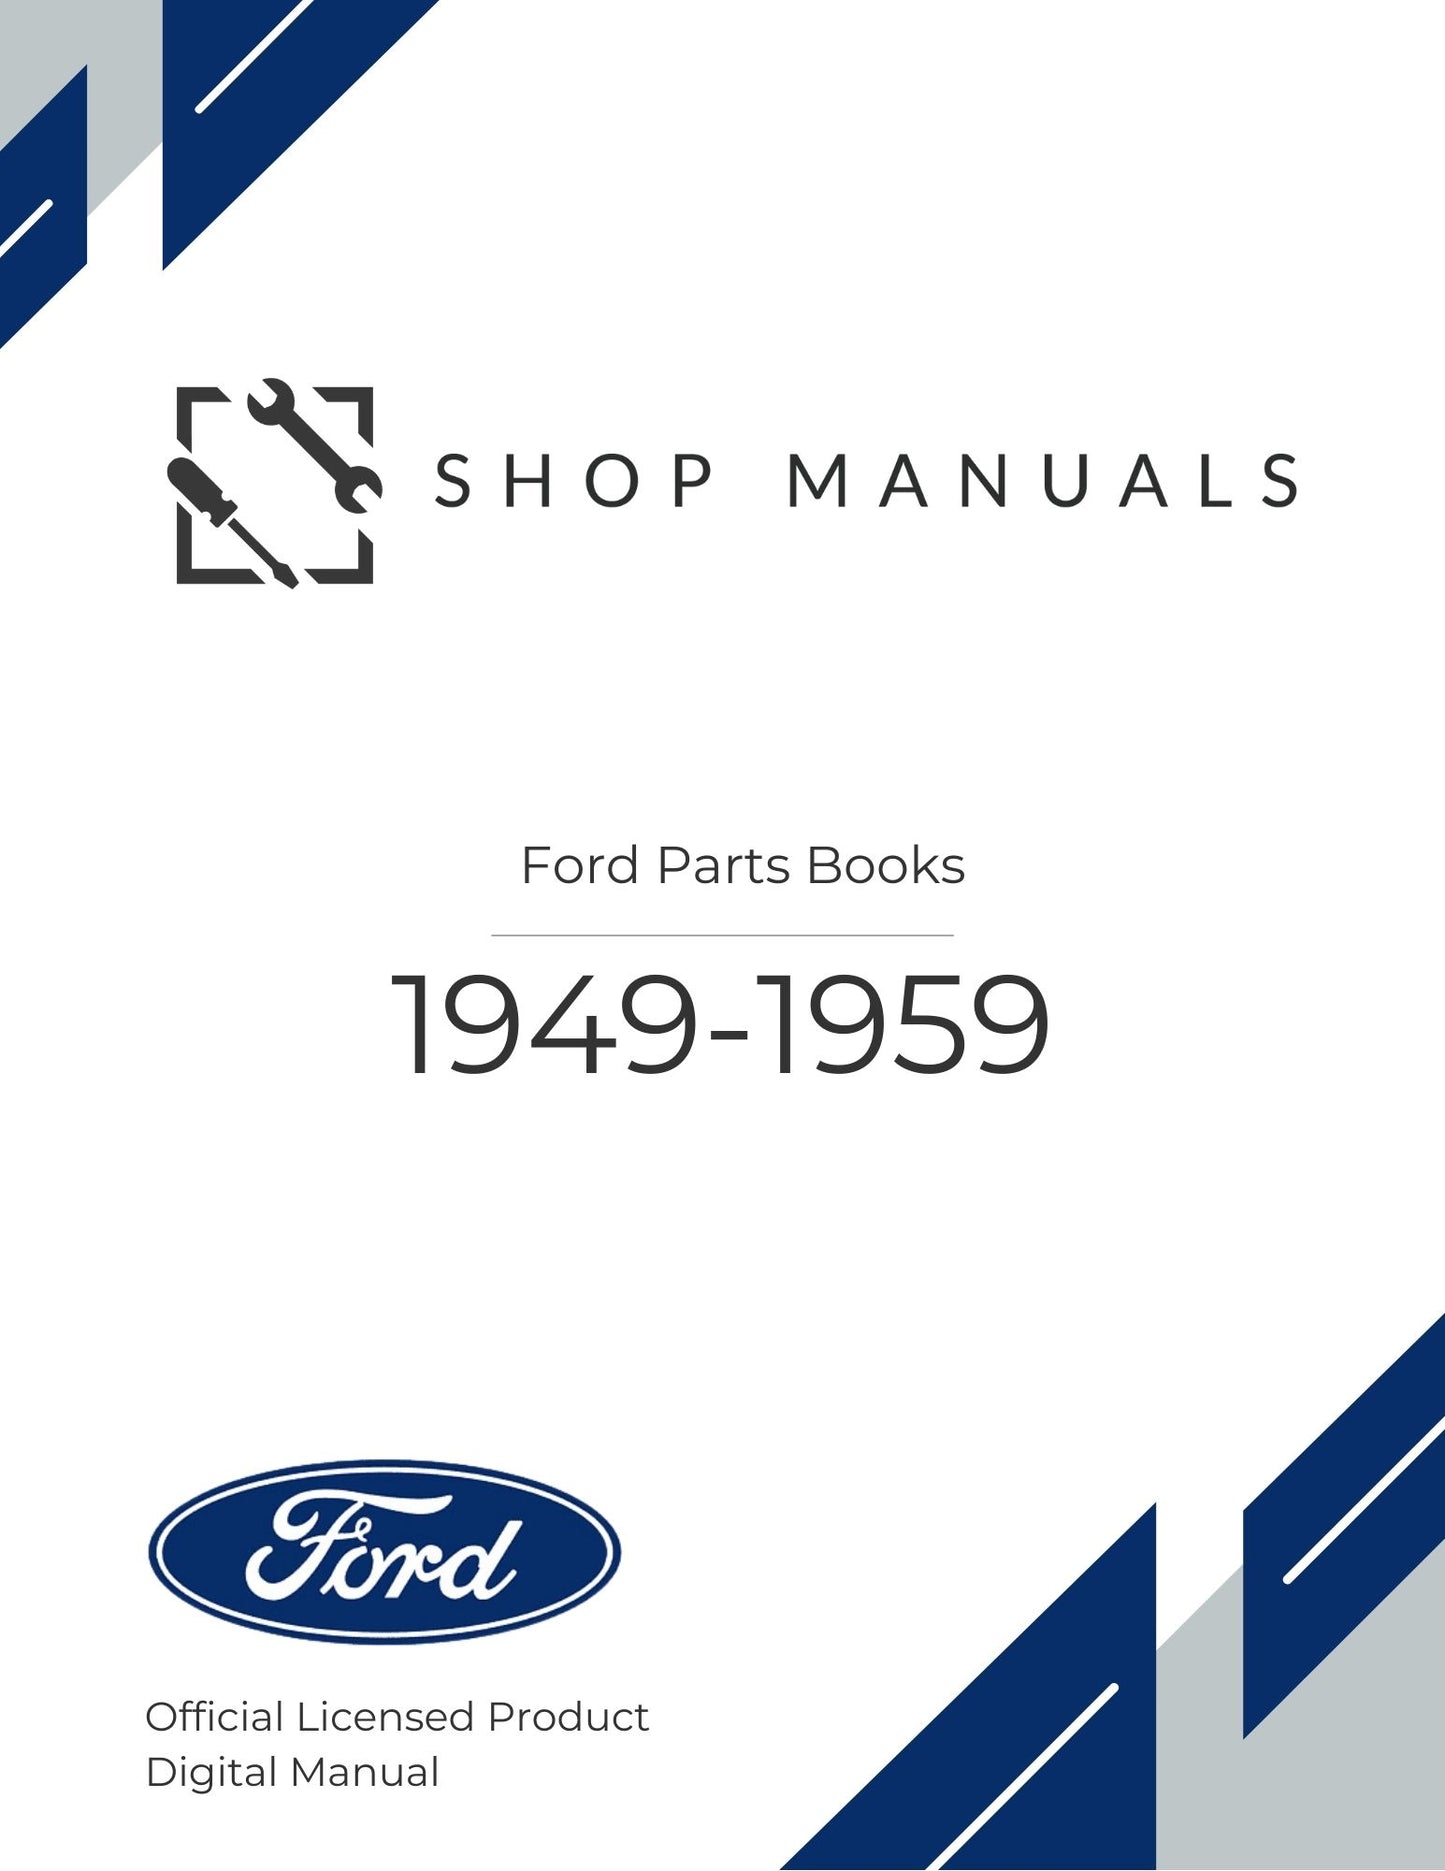 1949-1959 Ford Parts Books